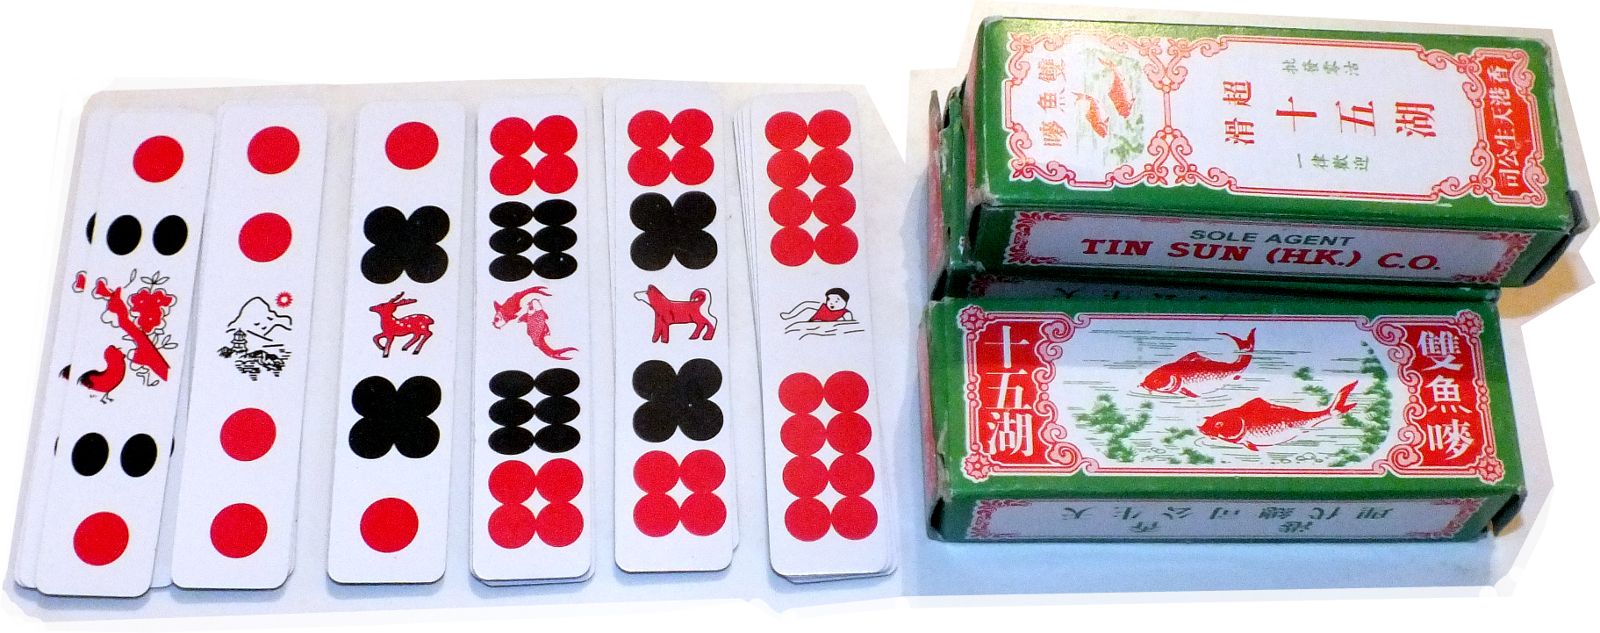 Chinese Domino playing cards imported into Hong Kong